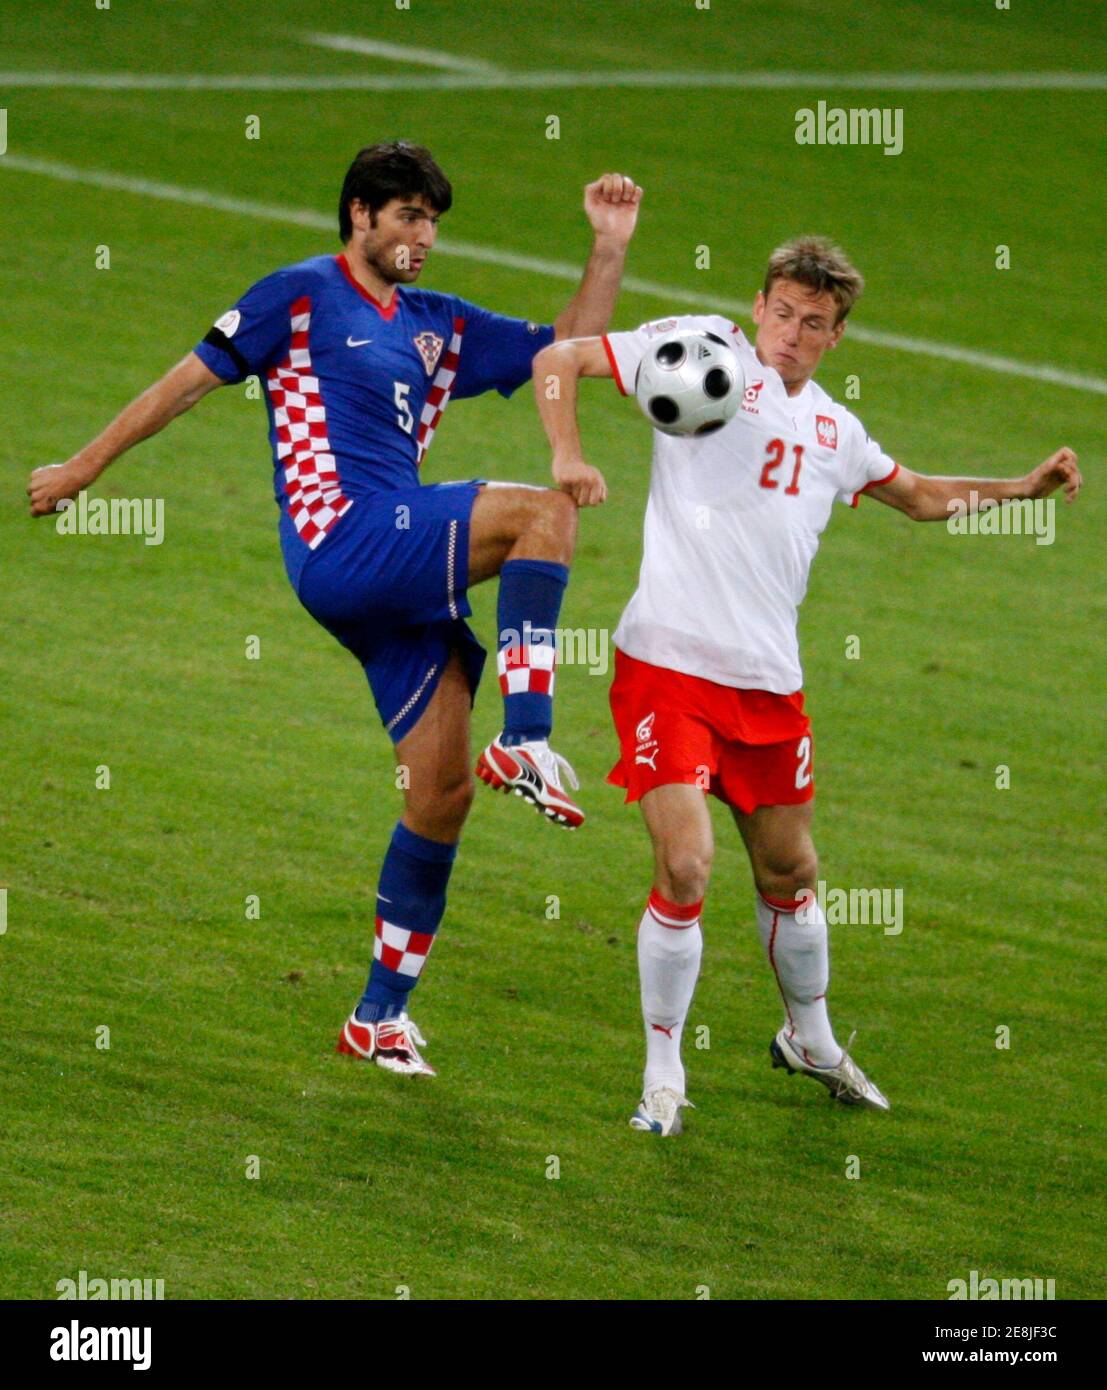 Croatia's Vedran Corluka (L) challenges Poland's Tomasz Zahorski during their Group B Euro 2008 soccer match at the Woerthersee Stadium in Klagenfurt June 16, 2008.     REUTERS/Miro Kuzmanovic (AUSTRIA)  MOBILE OUT. EDITORIAL USE ONLY Stock Photo